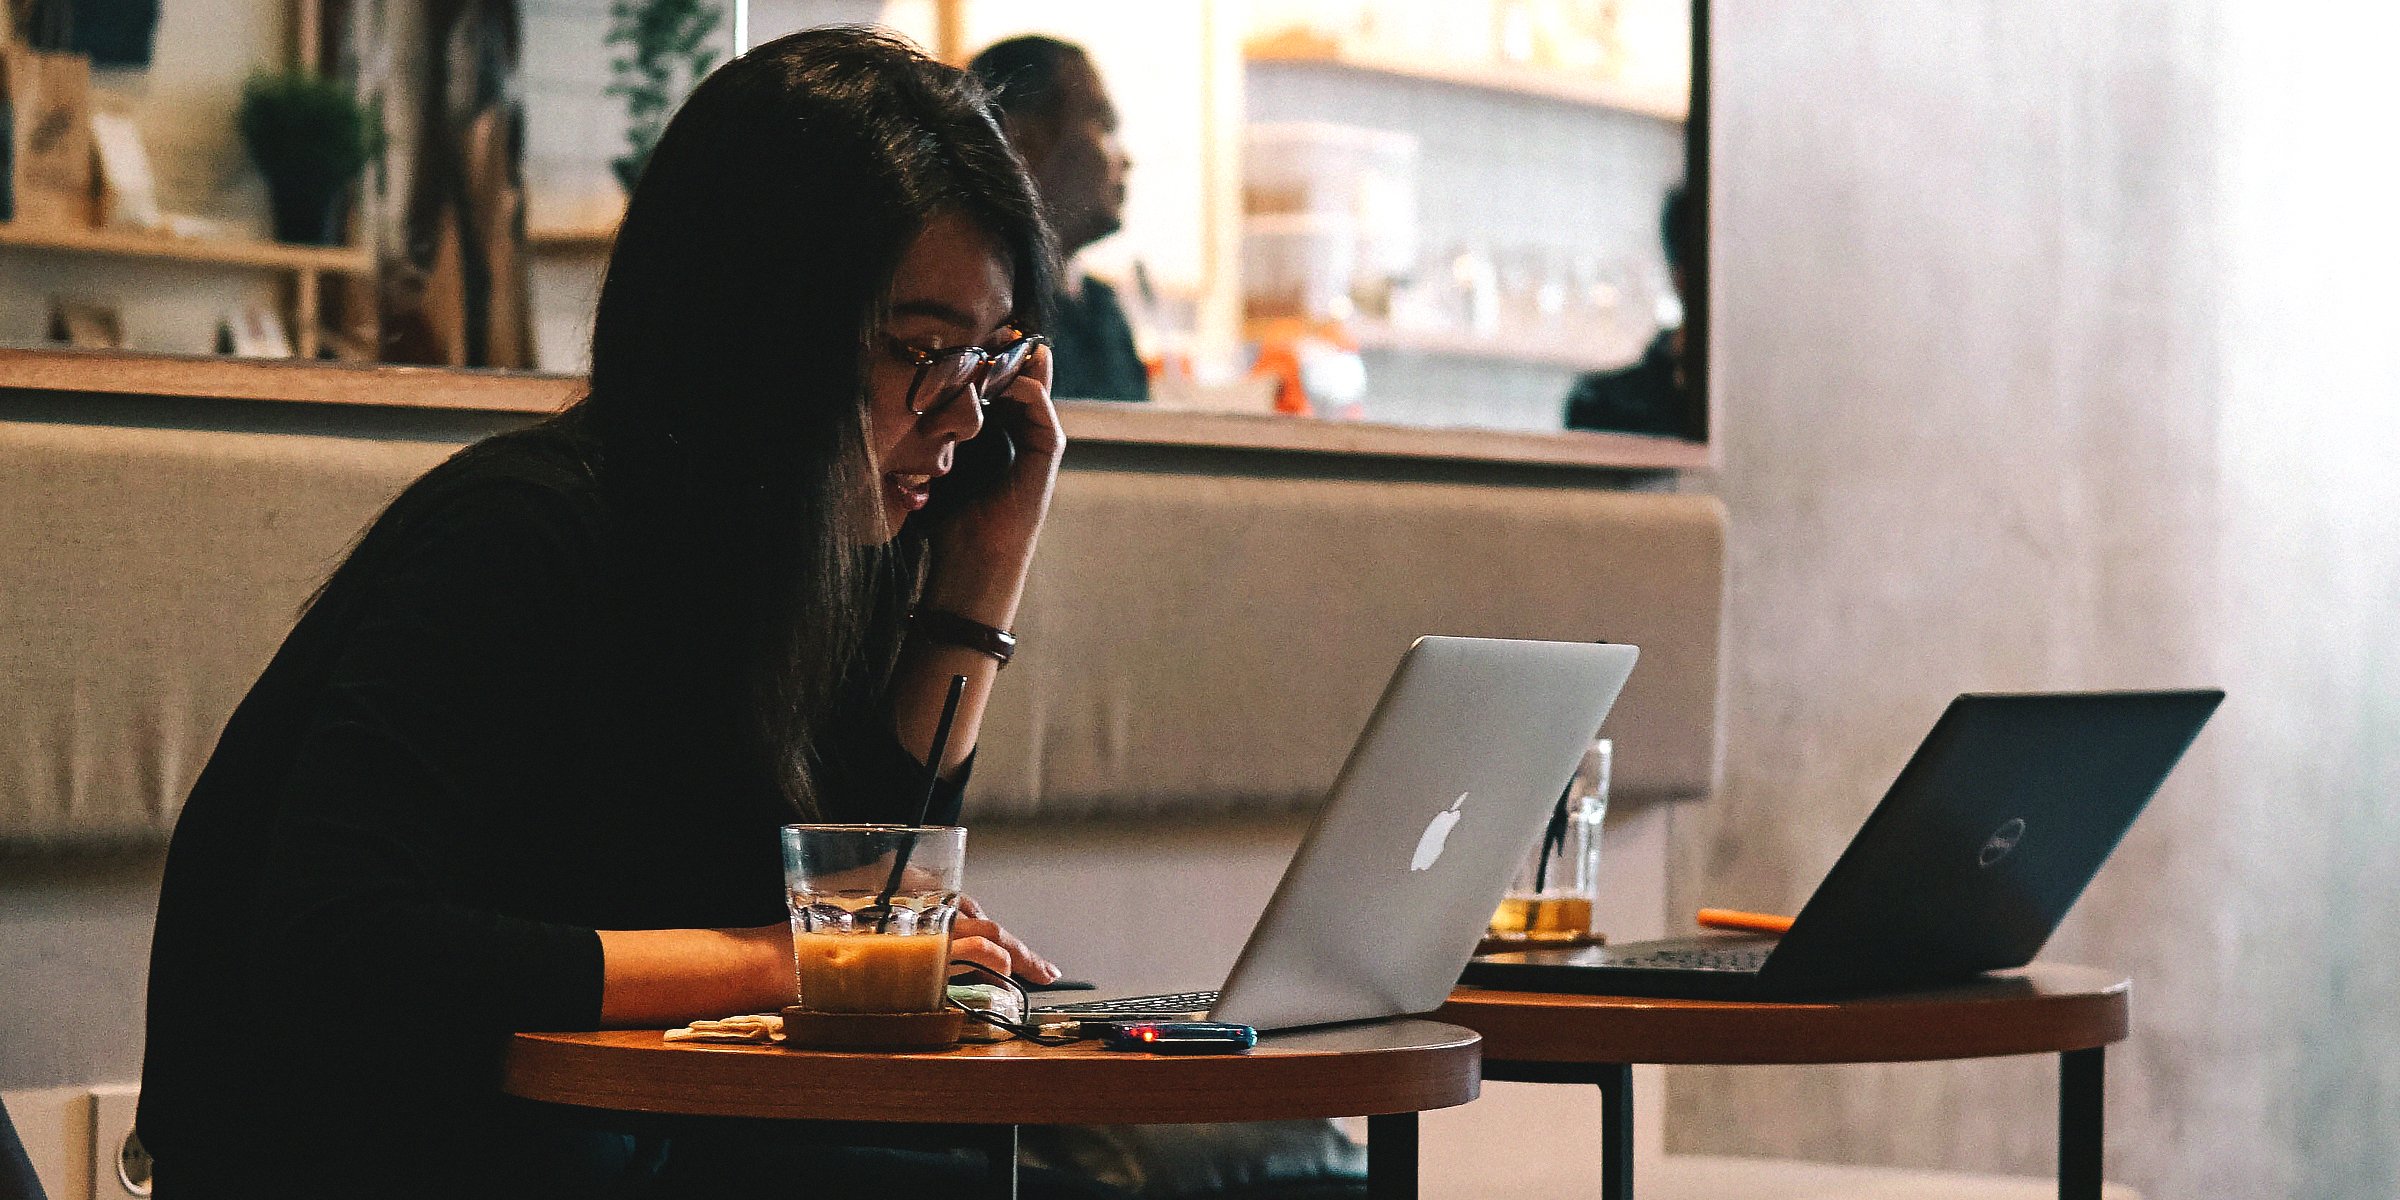 A lady on her phone and laptop in a restaurant | Source: Unsplash 